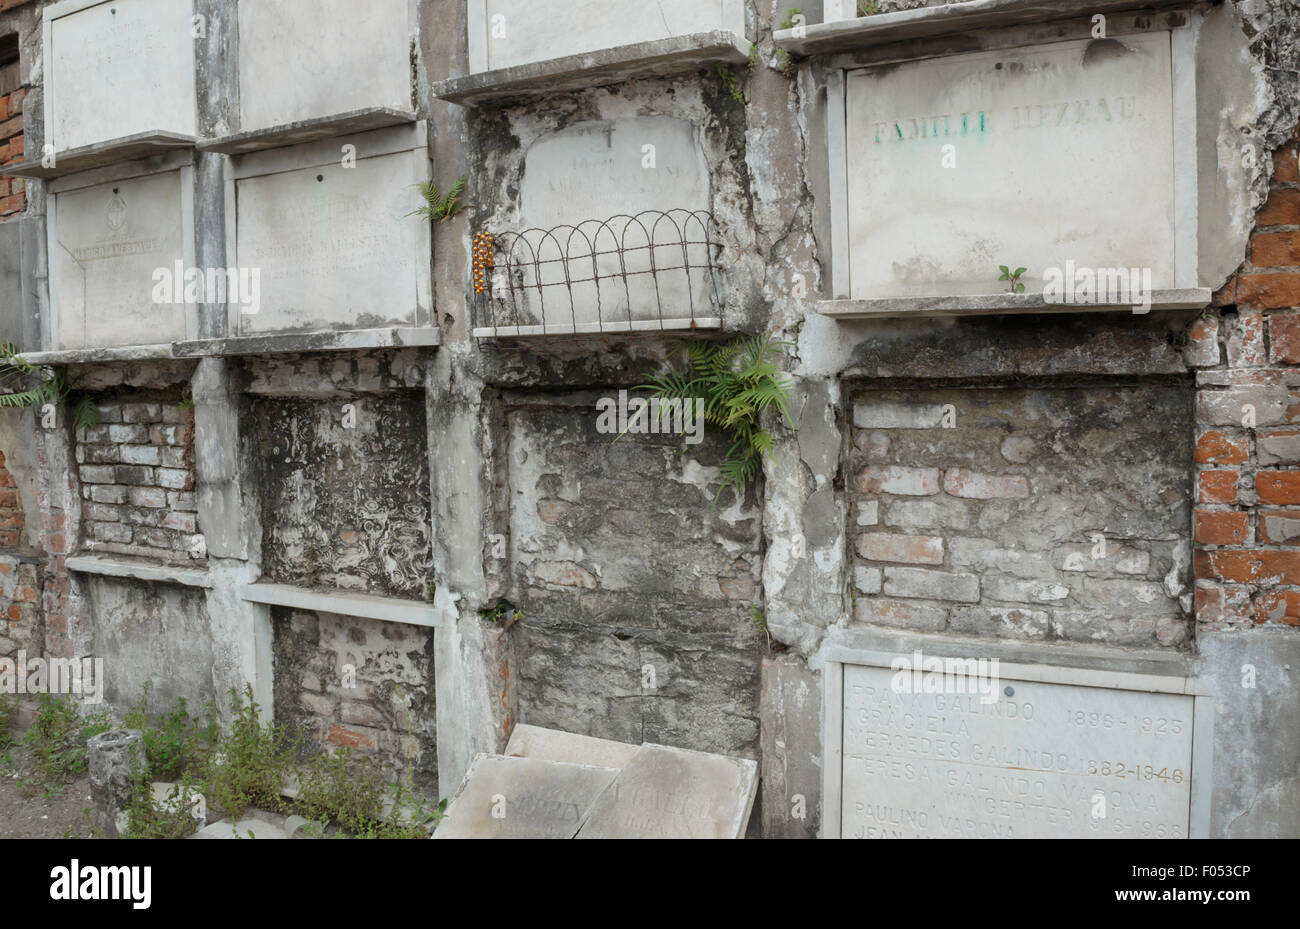 Walled Burial Vaults, St. Louis Cemetery in New Orleans, Louisiana USA. Most of the graves in this cemetery are above ground. Stock Photo